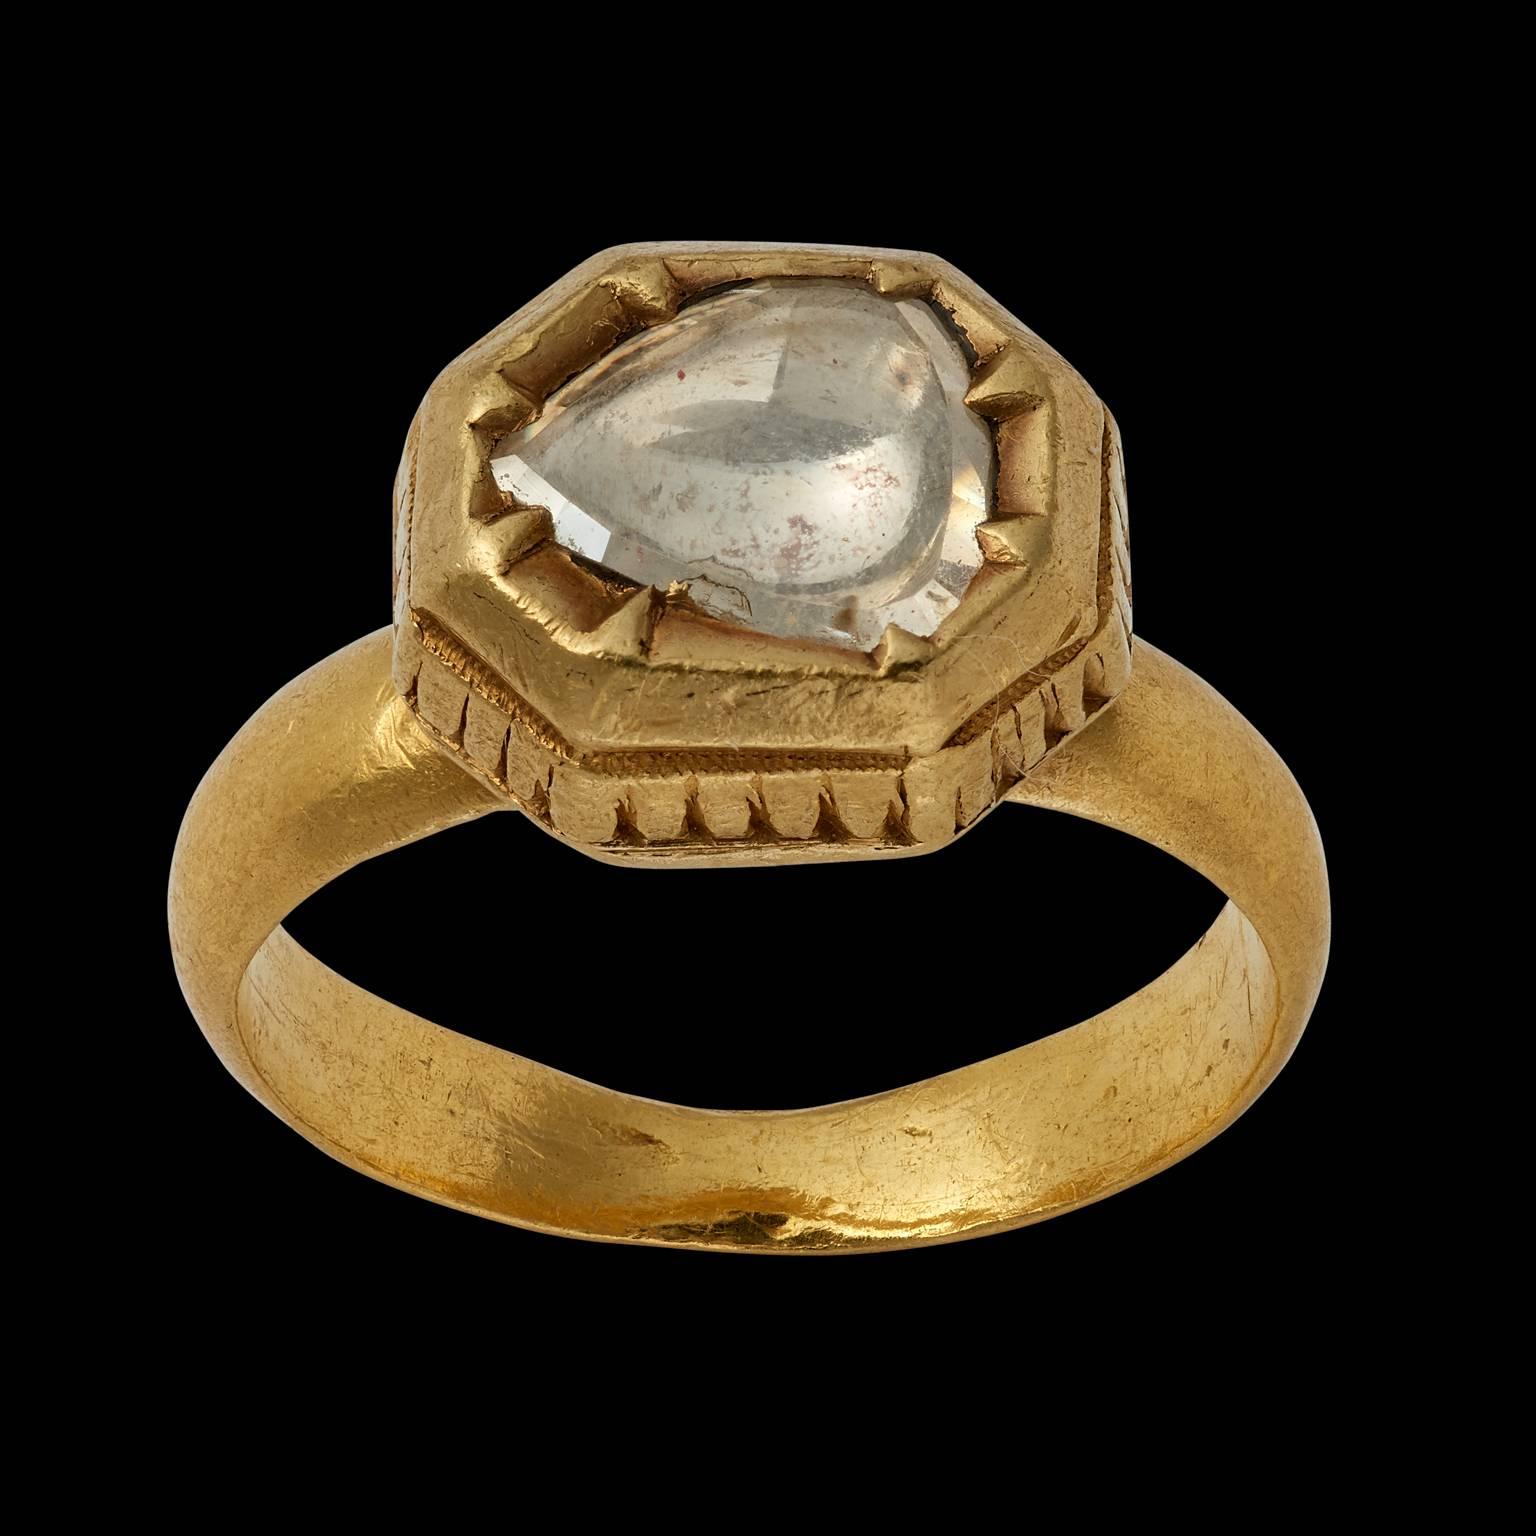 Ring
Rajasthan, North India
Early 19th century

Gold with a single foiled diamond. 

